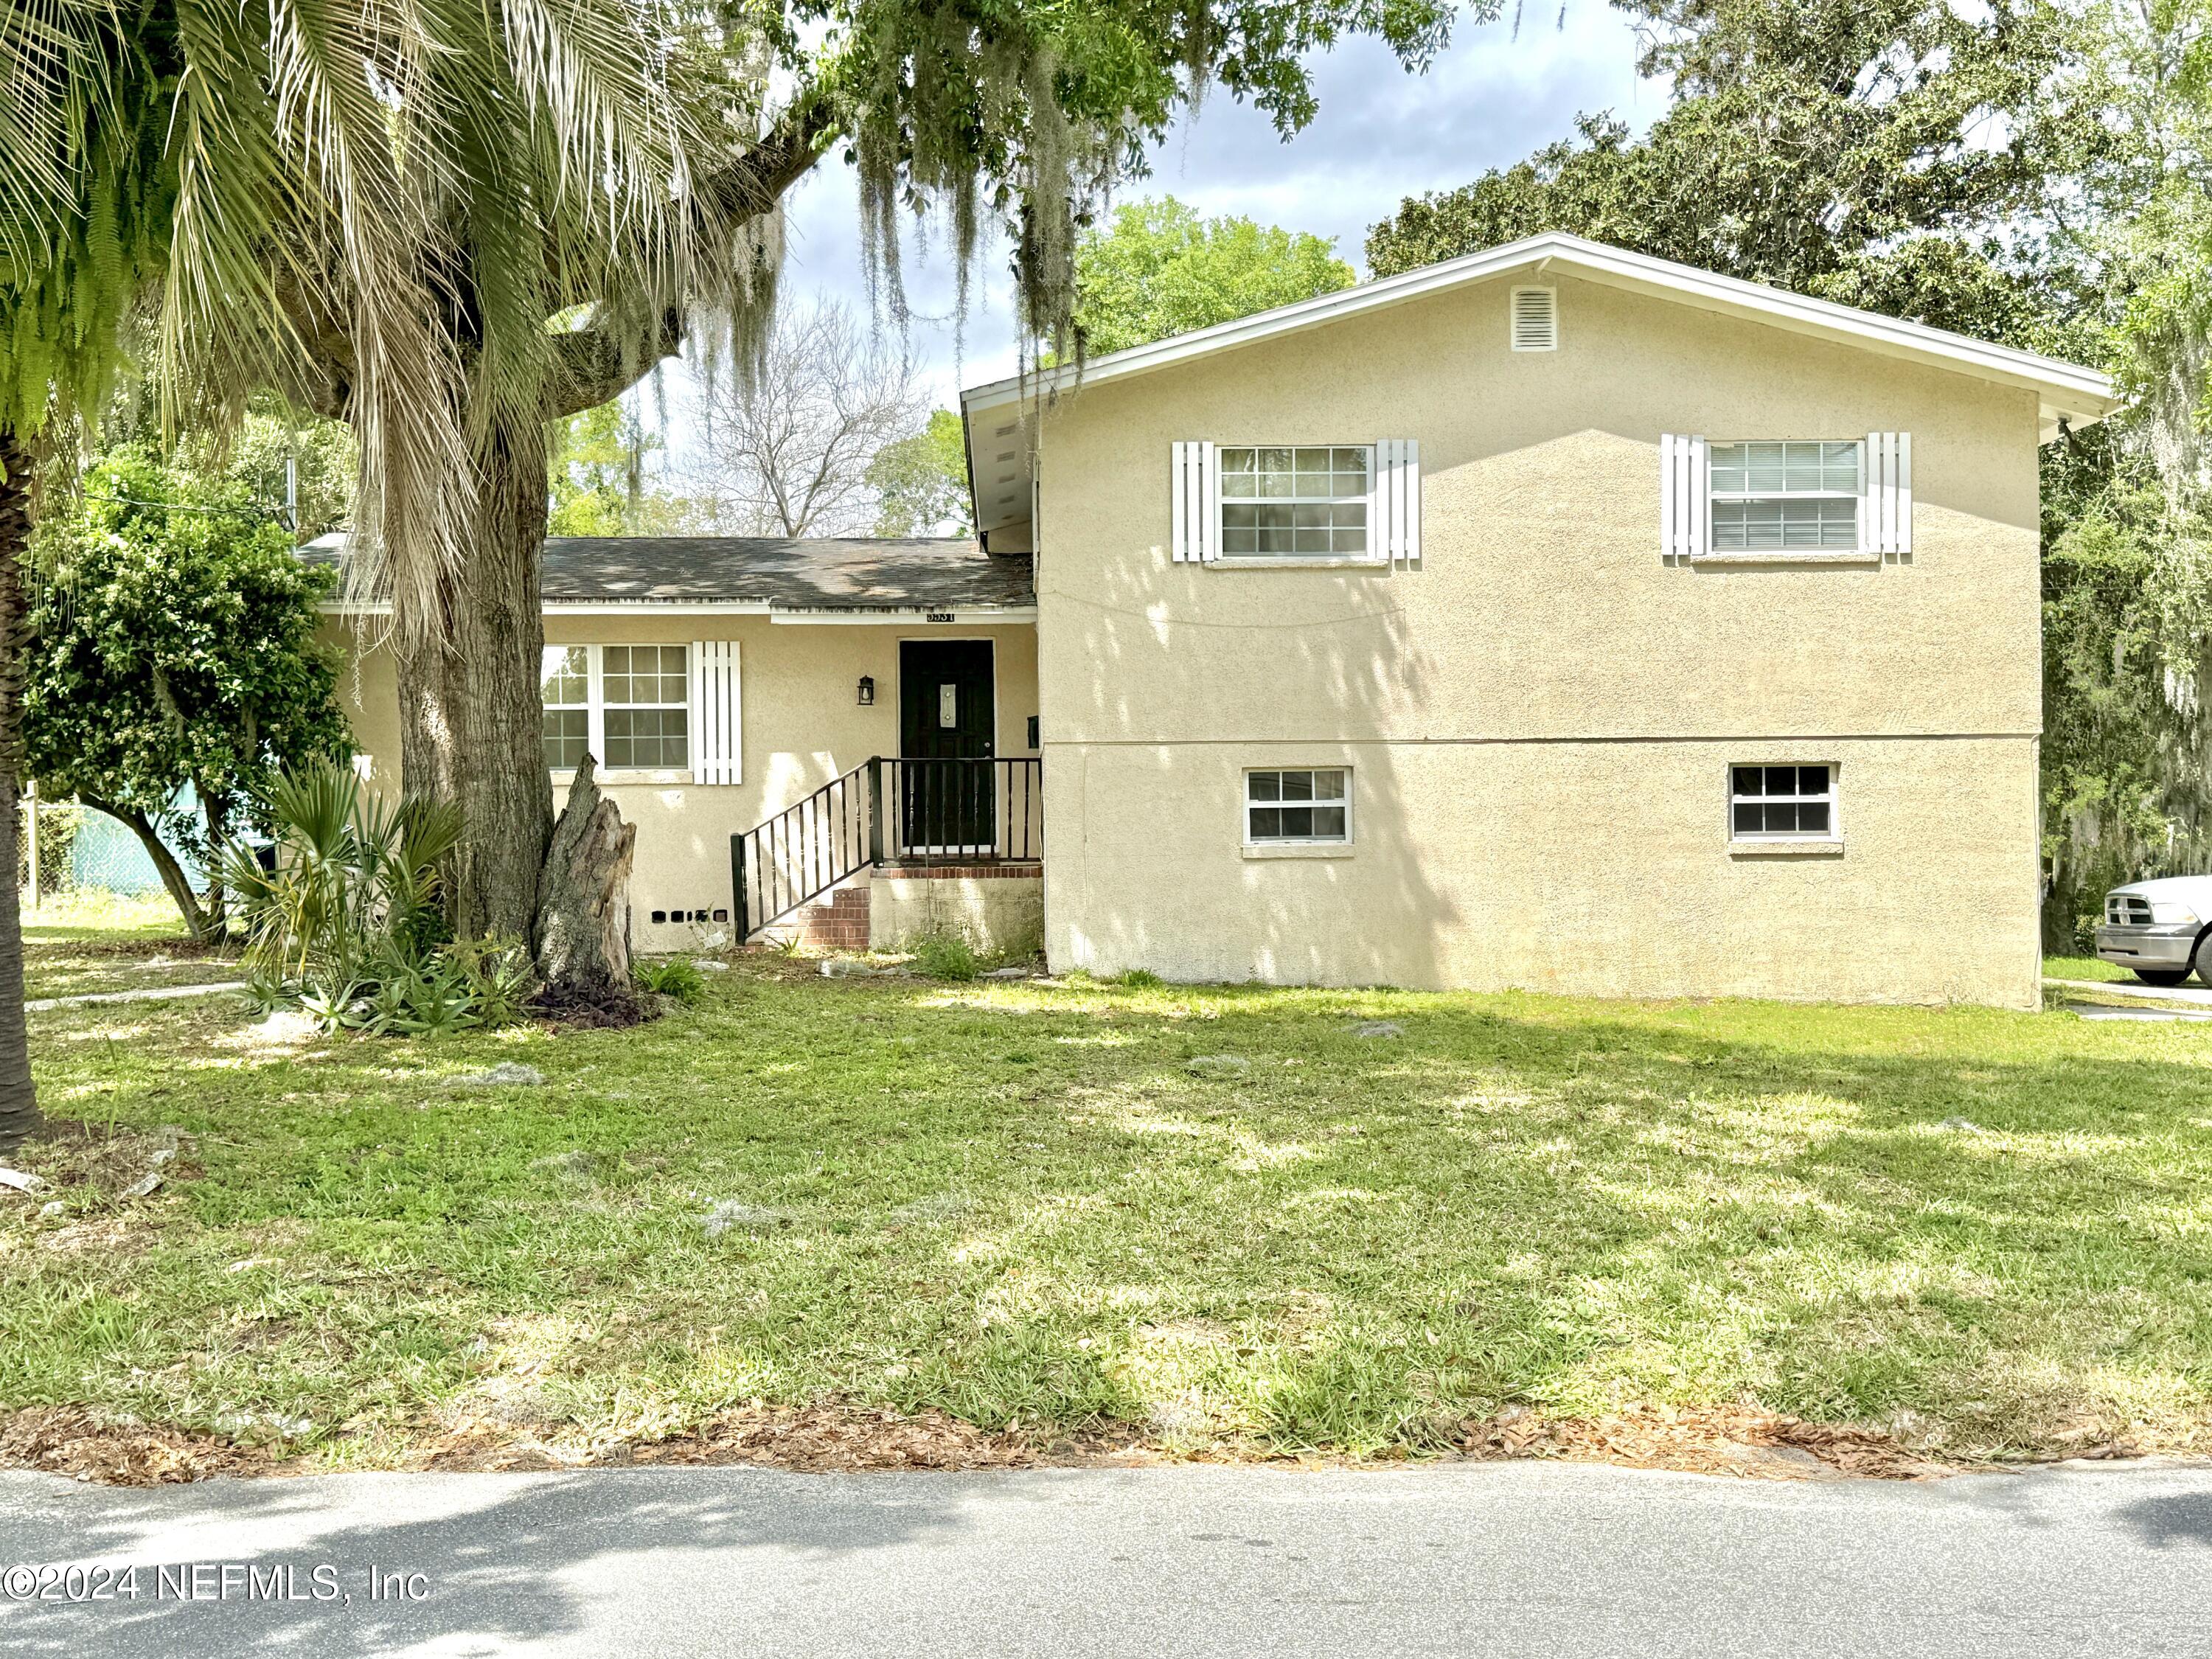 Jacksonville, FL home for sale located at 5531 GHORMLEY Road, Jacksonville, FL 32277